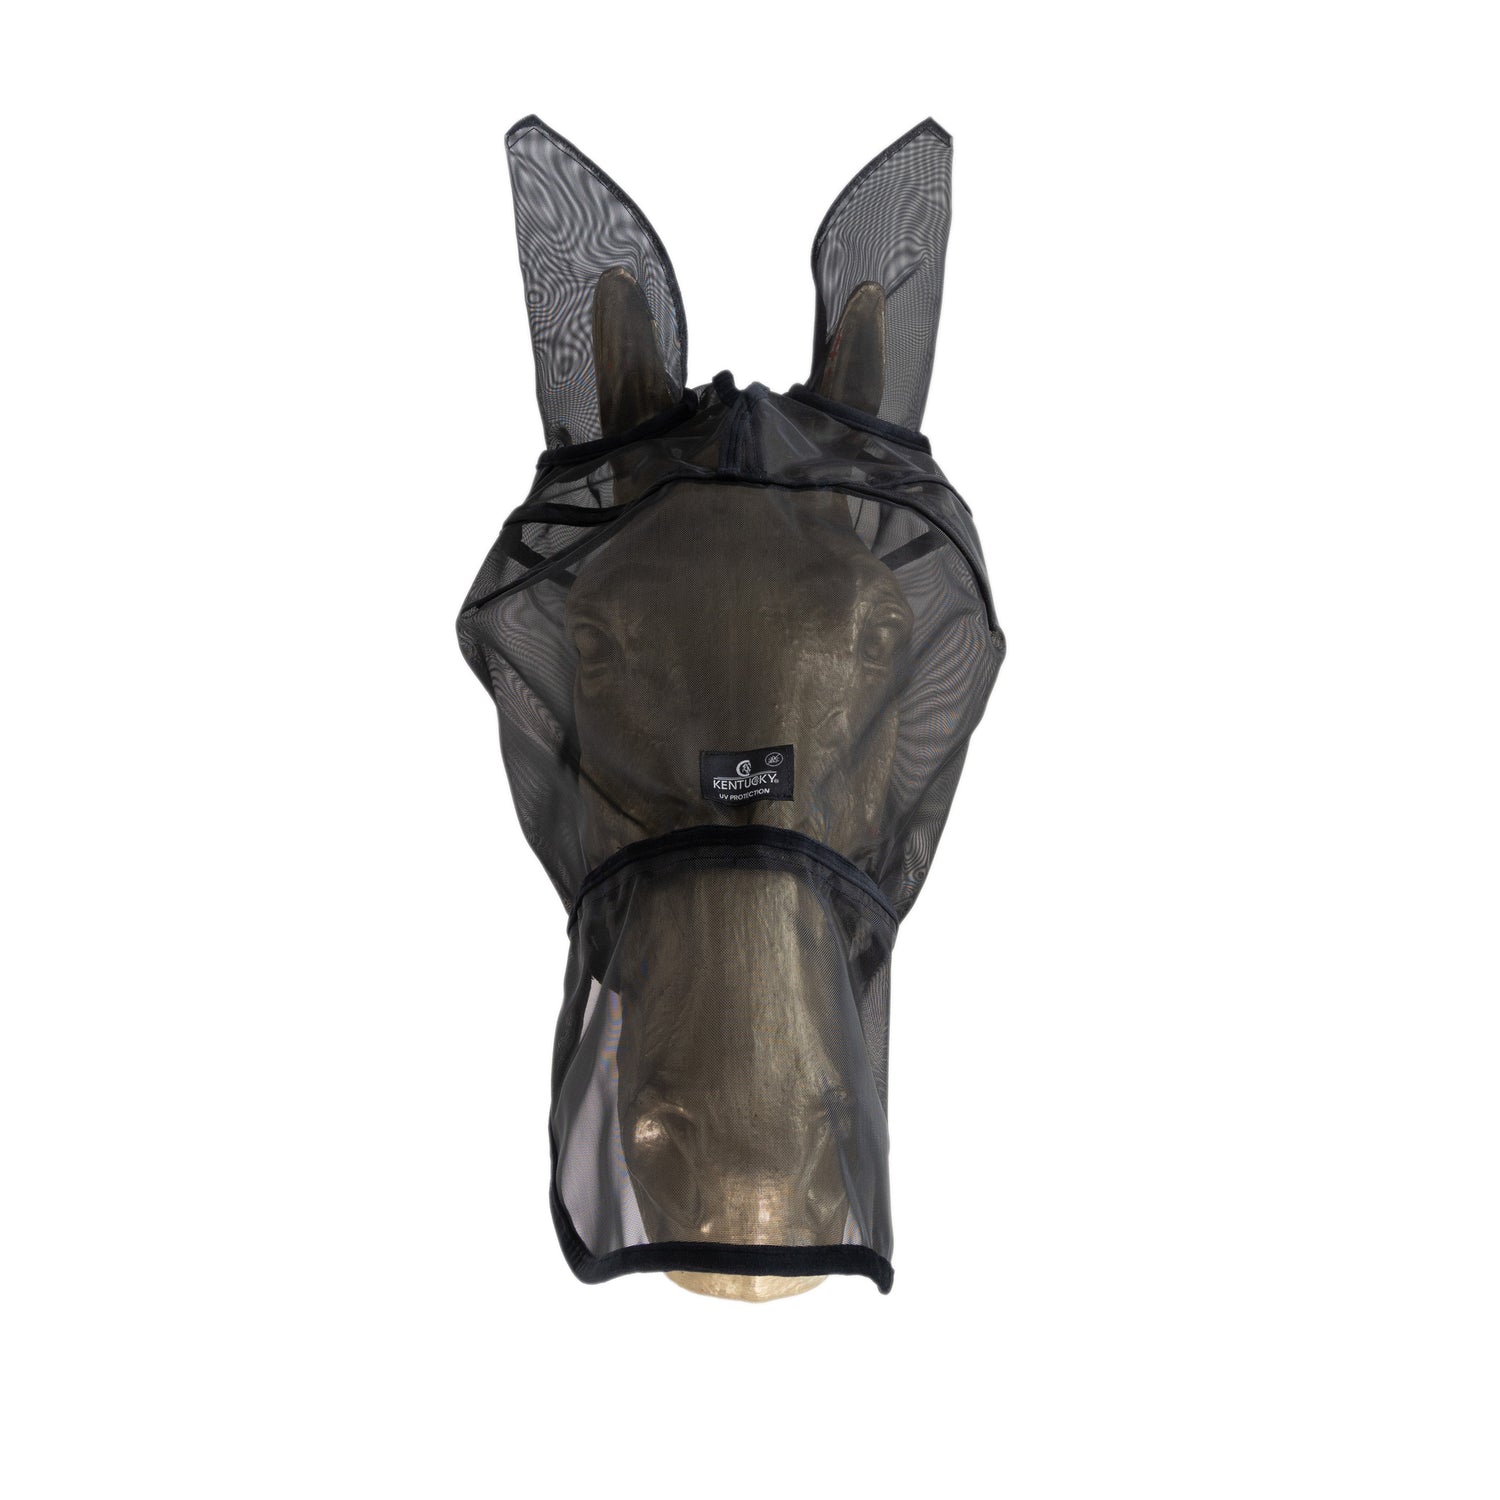 Best fly mask with nose protection